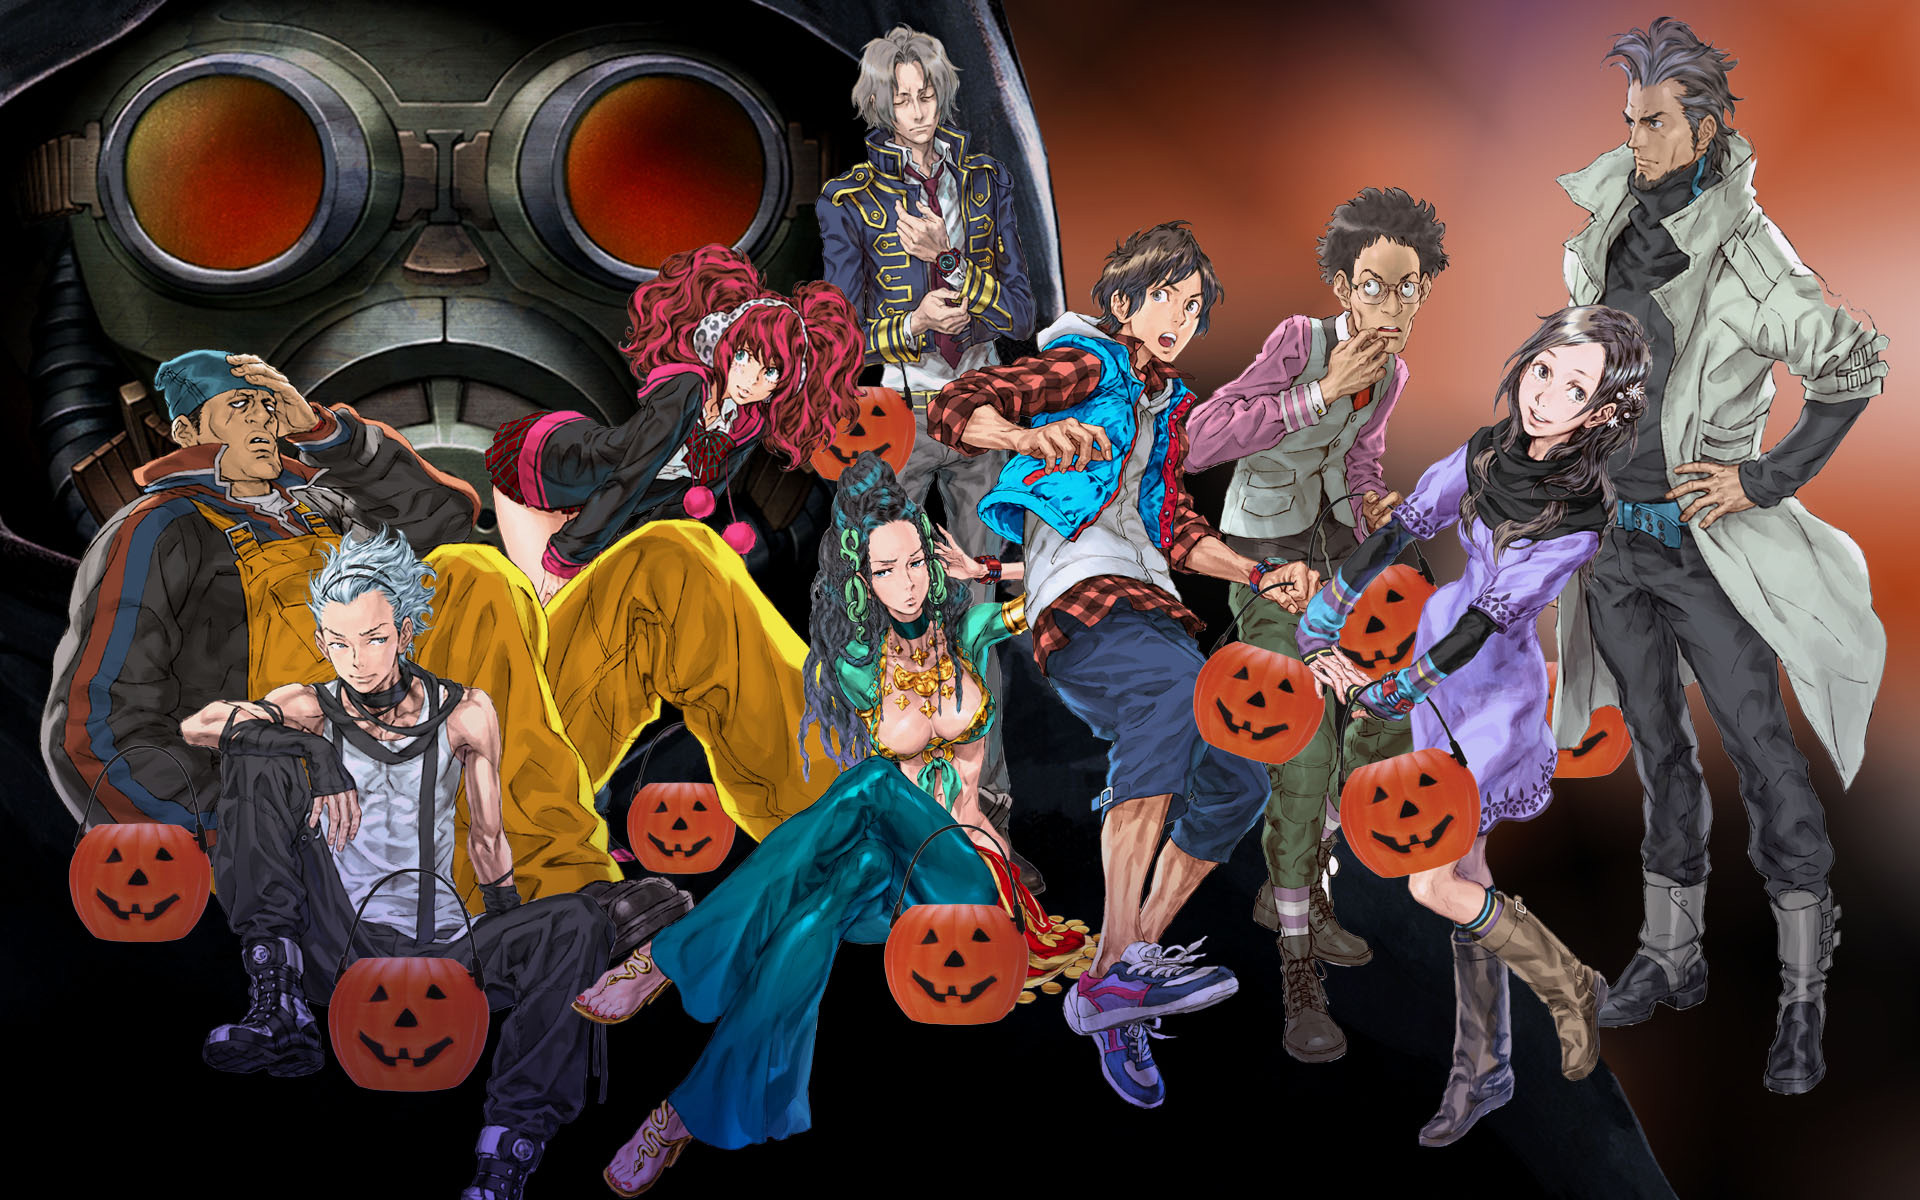 official art of the cast of 999 but everyone has a jack-o-lantern candy bucket as well